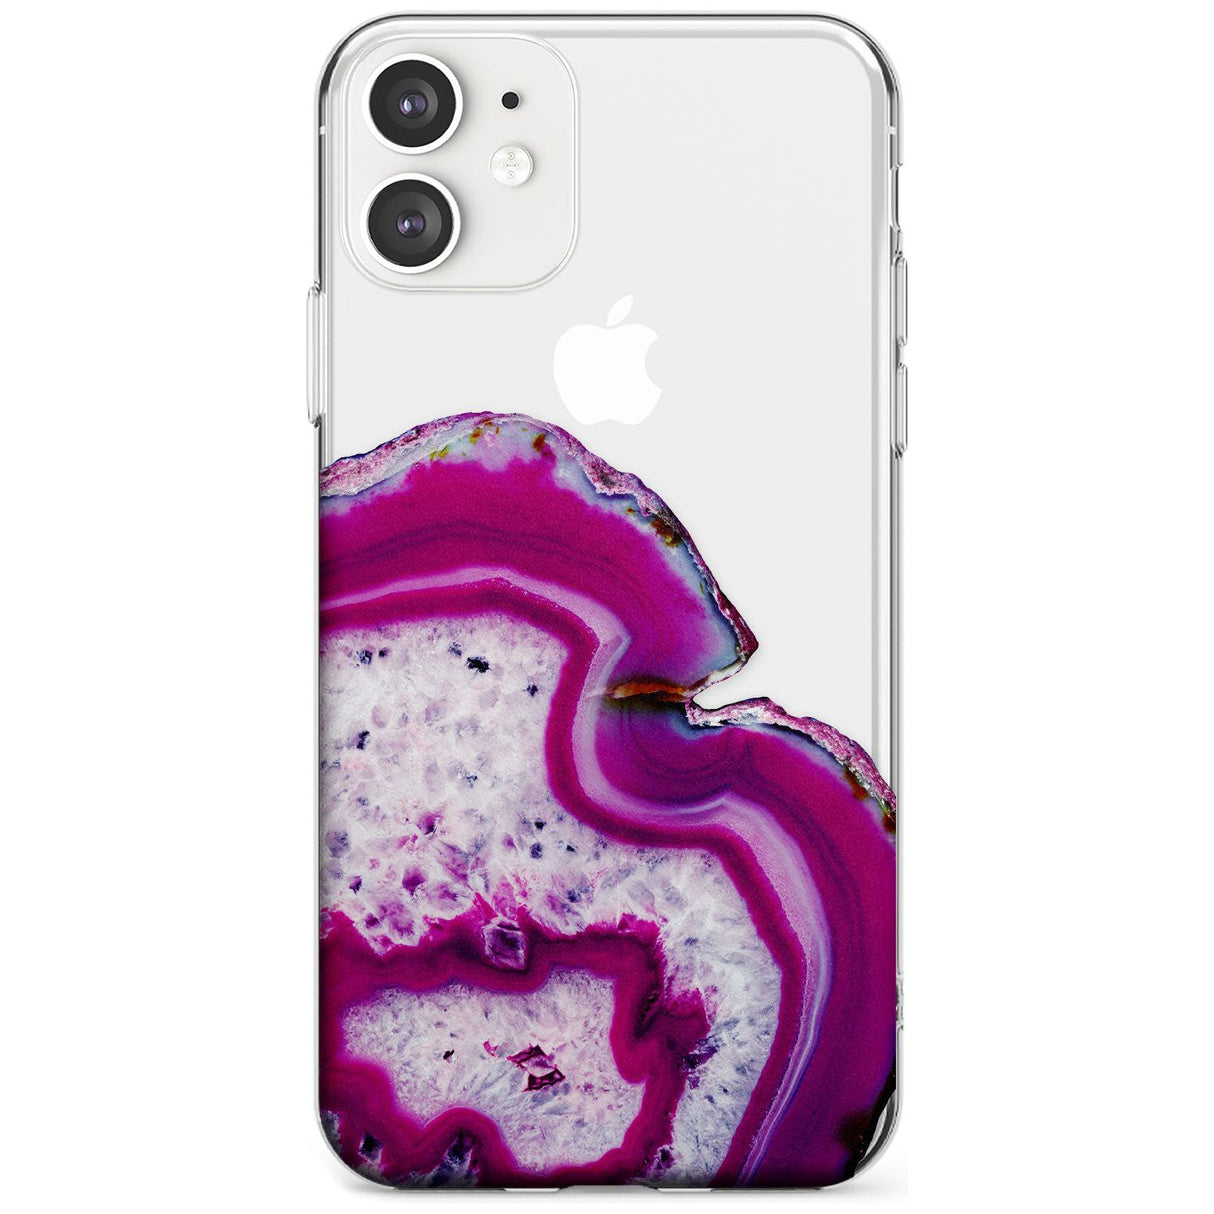 Violet & White Swirl Agate Crystal Clear Design Slim TPU Phone Case for iPhone 11